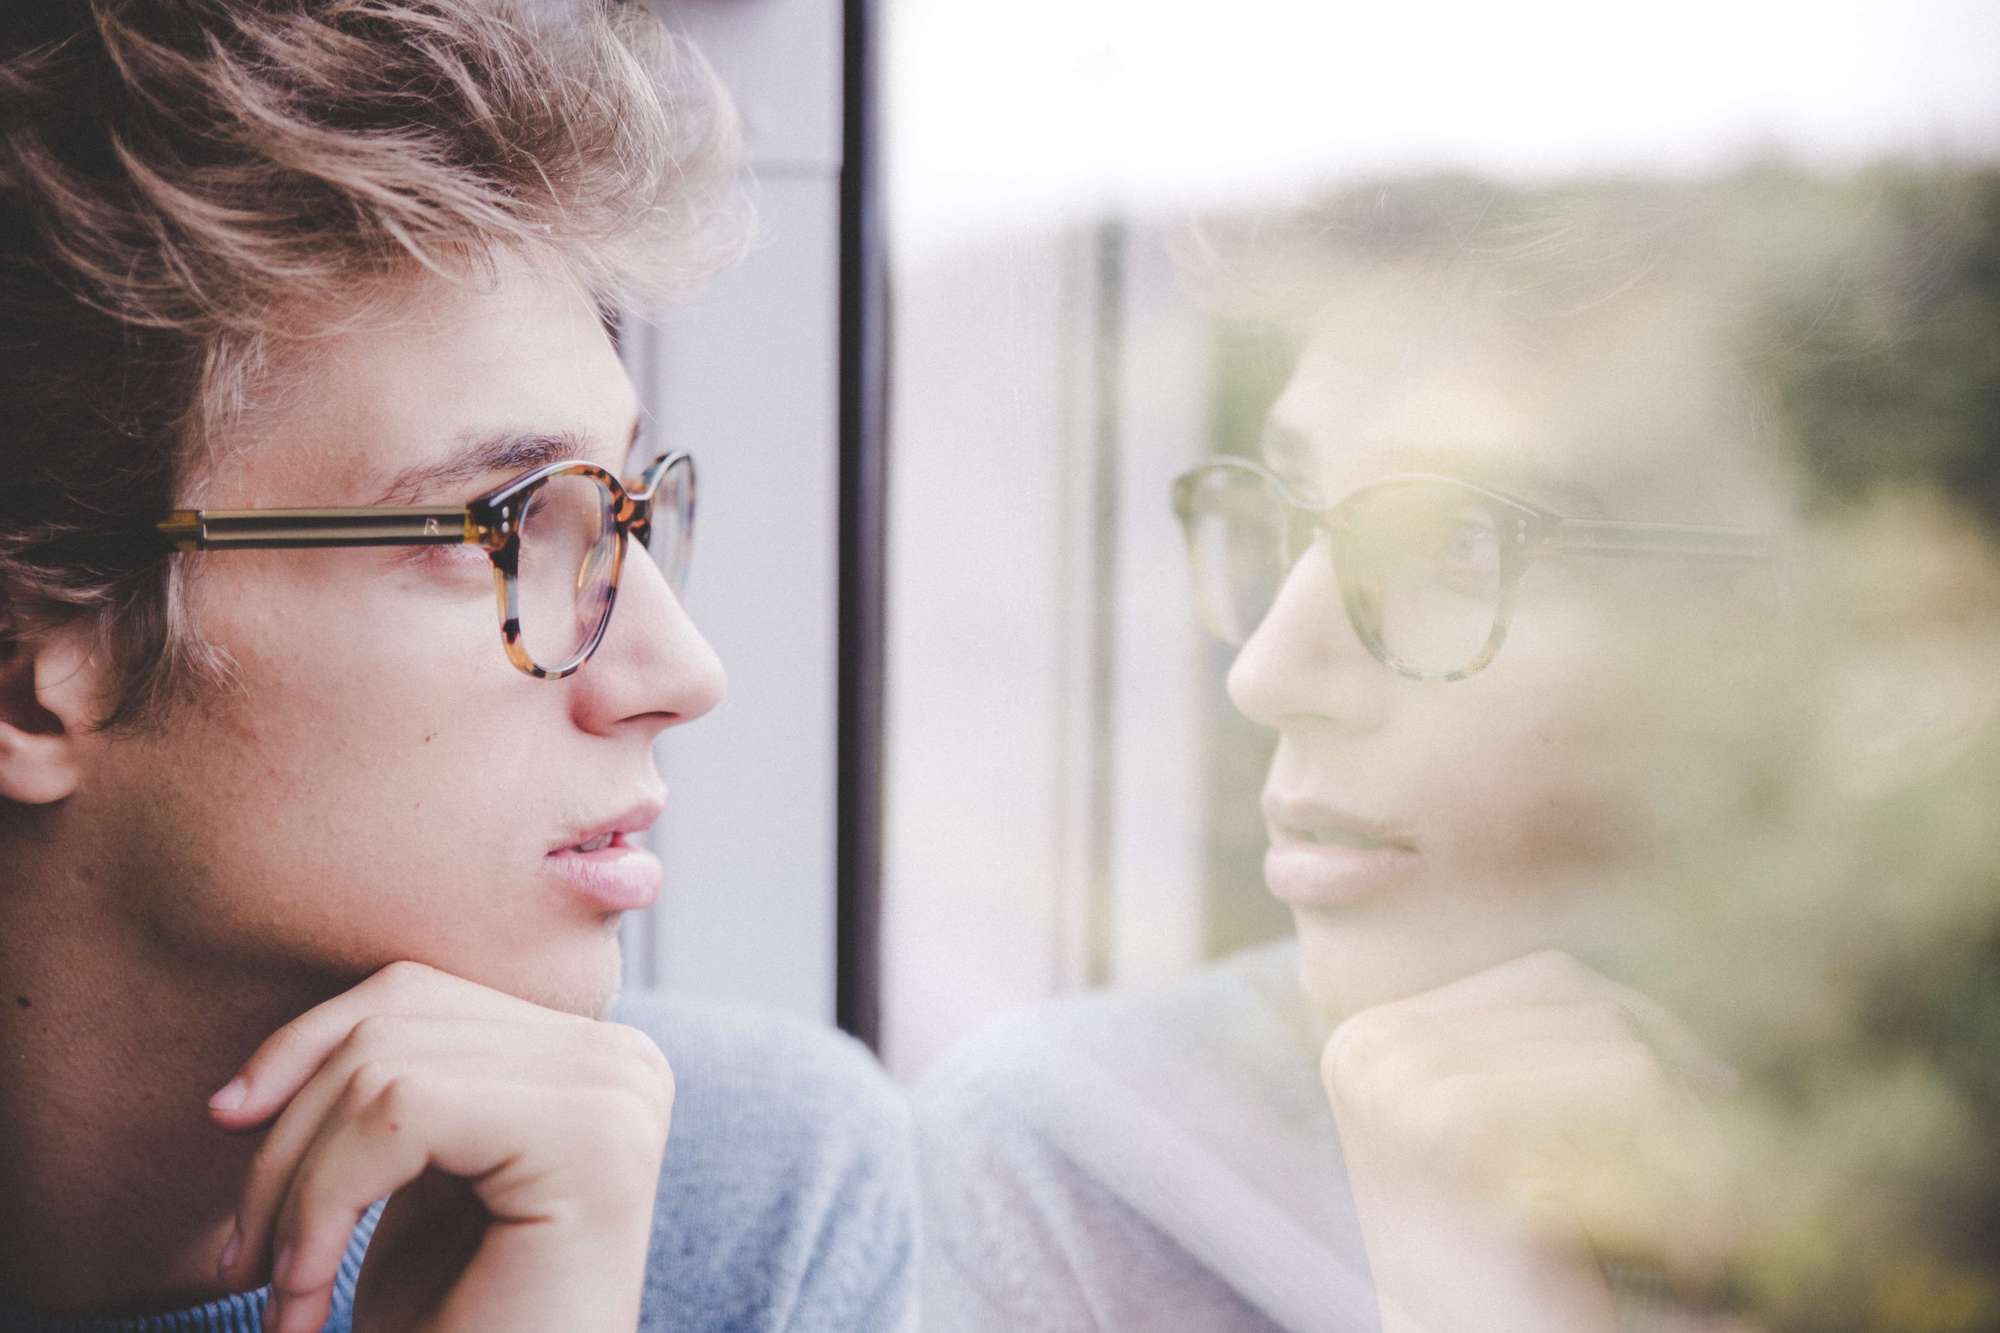 Man with glasses looking out of window with his reflection visible in the glass.